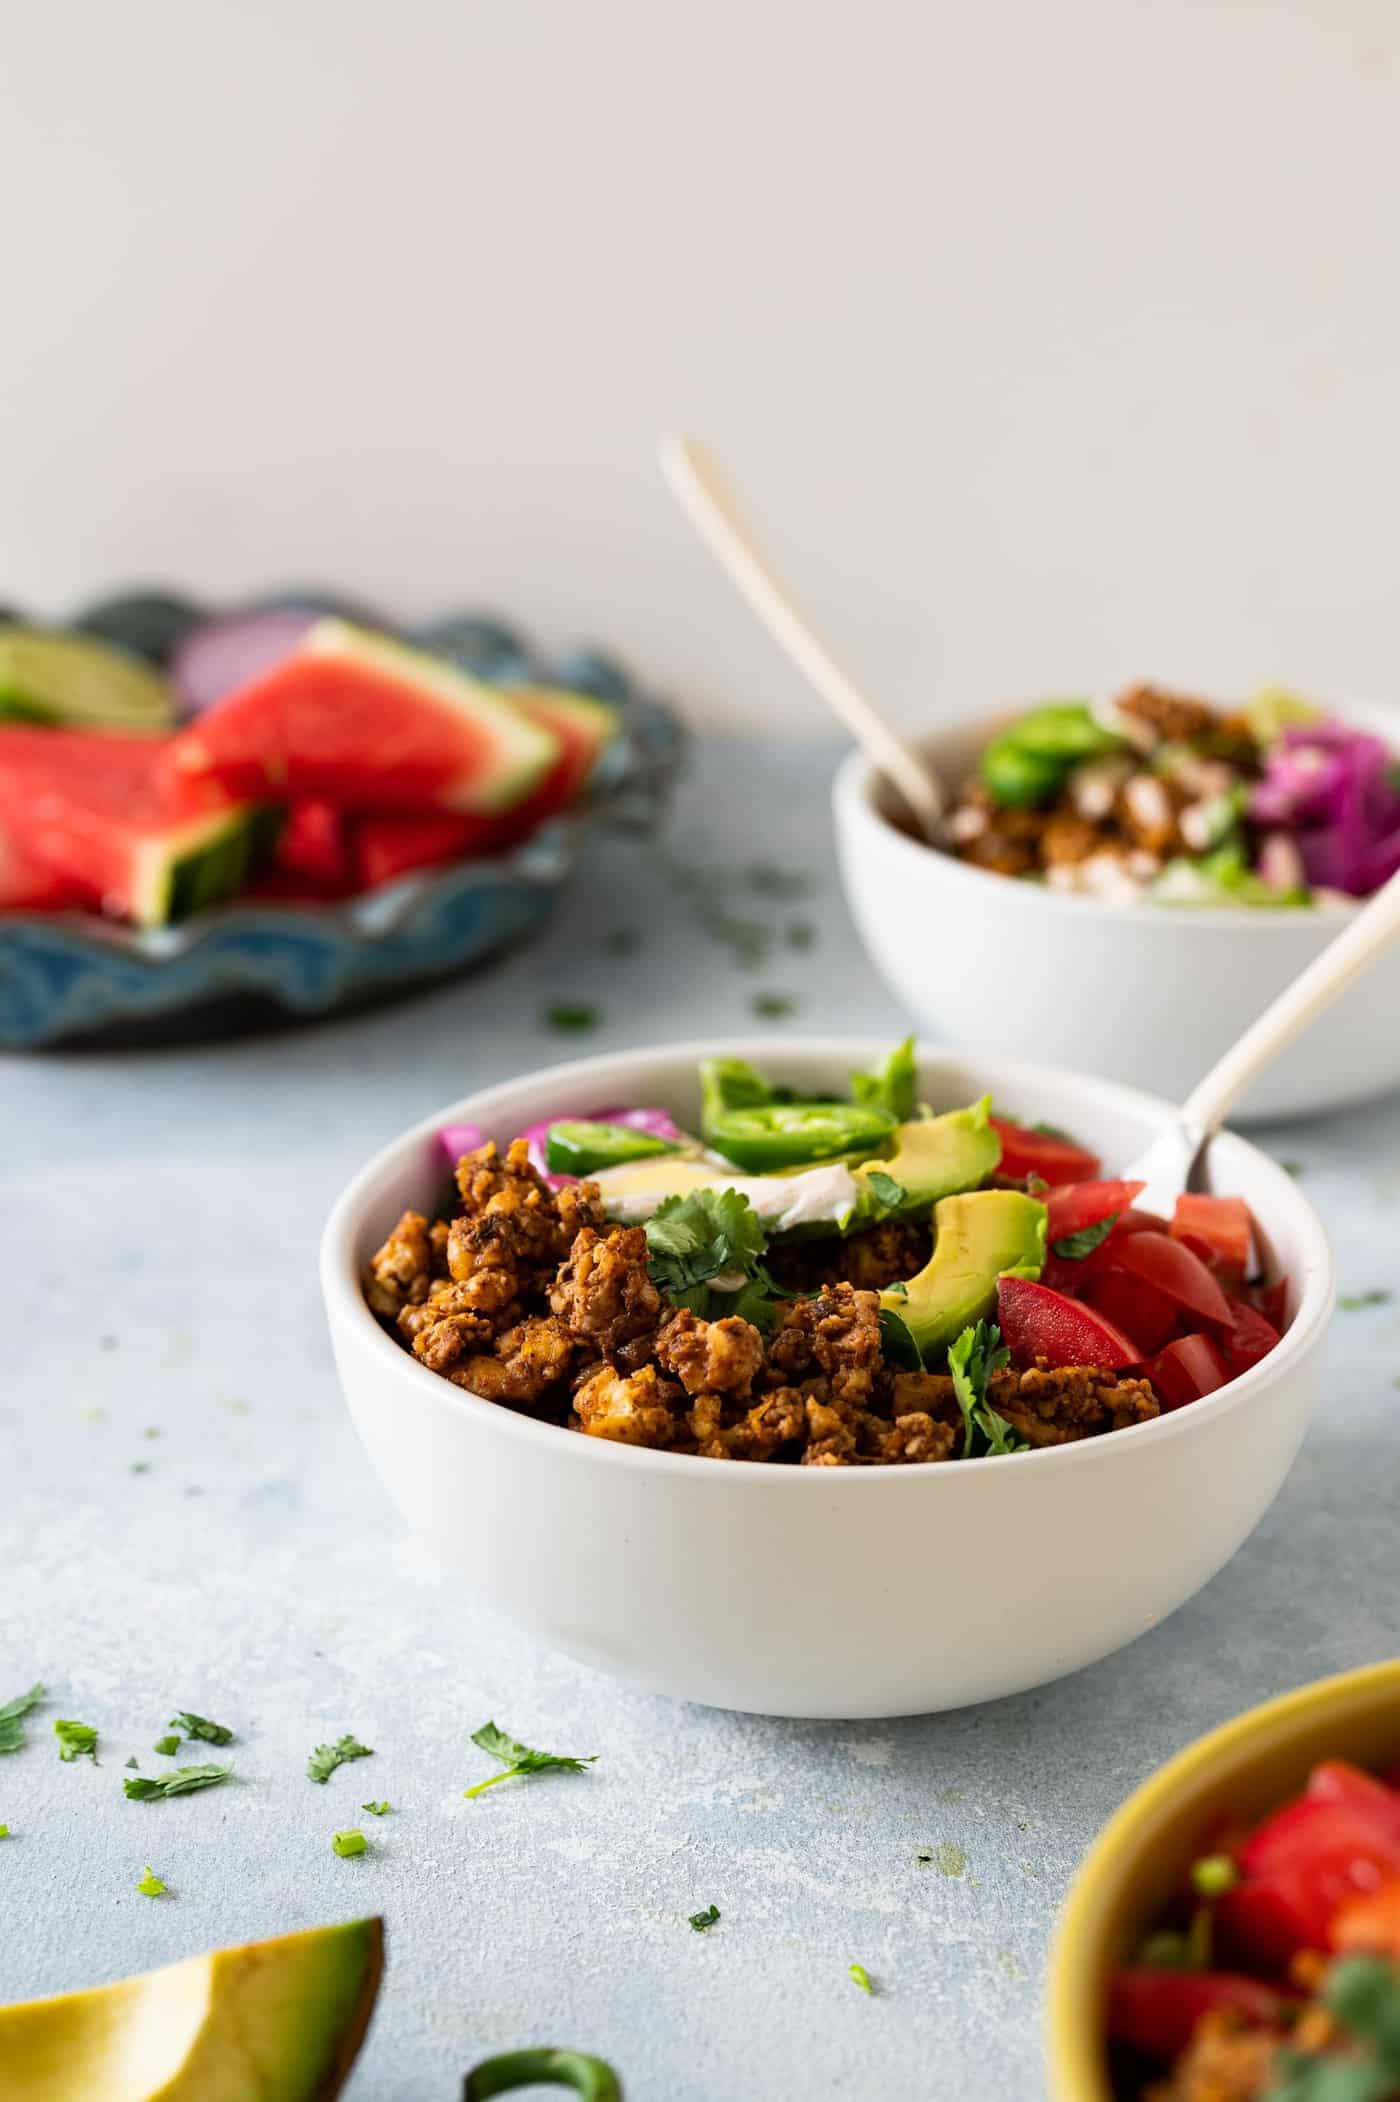 Vegan Taco Salad Bowls with Tempeh Walnut Taco Meat recipe via The Pig & Quill #plantbased #grainfree